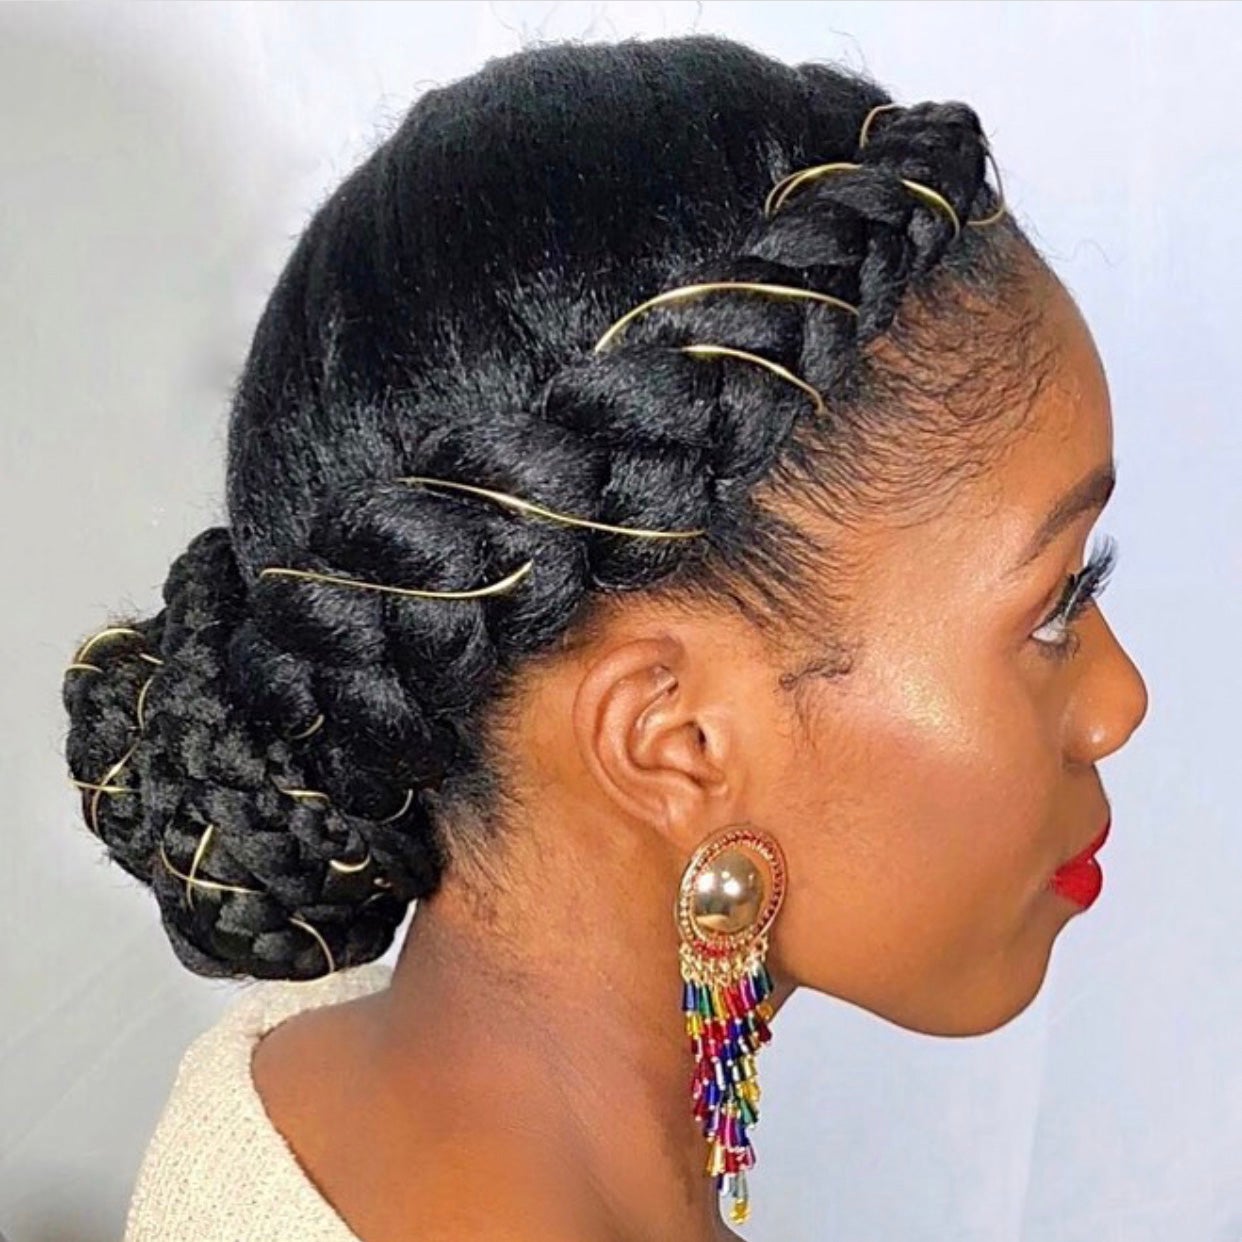 Click to SEE MORE protective styles for natural hair braids latest & easy hairstyles for black women. See updos on medium length to long hair, simple transitioning hairstyles for wedding, also SEE...